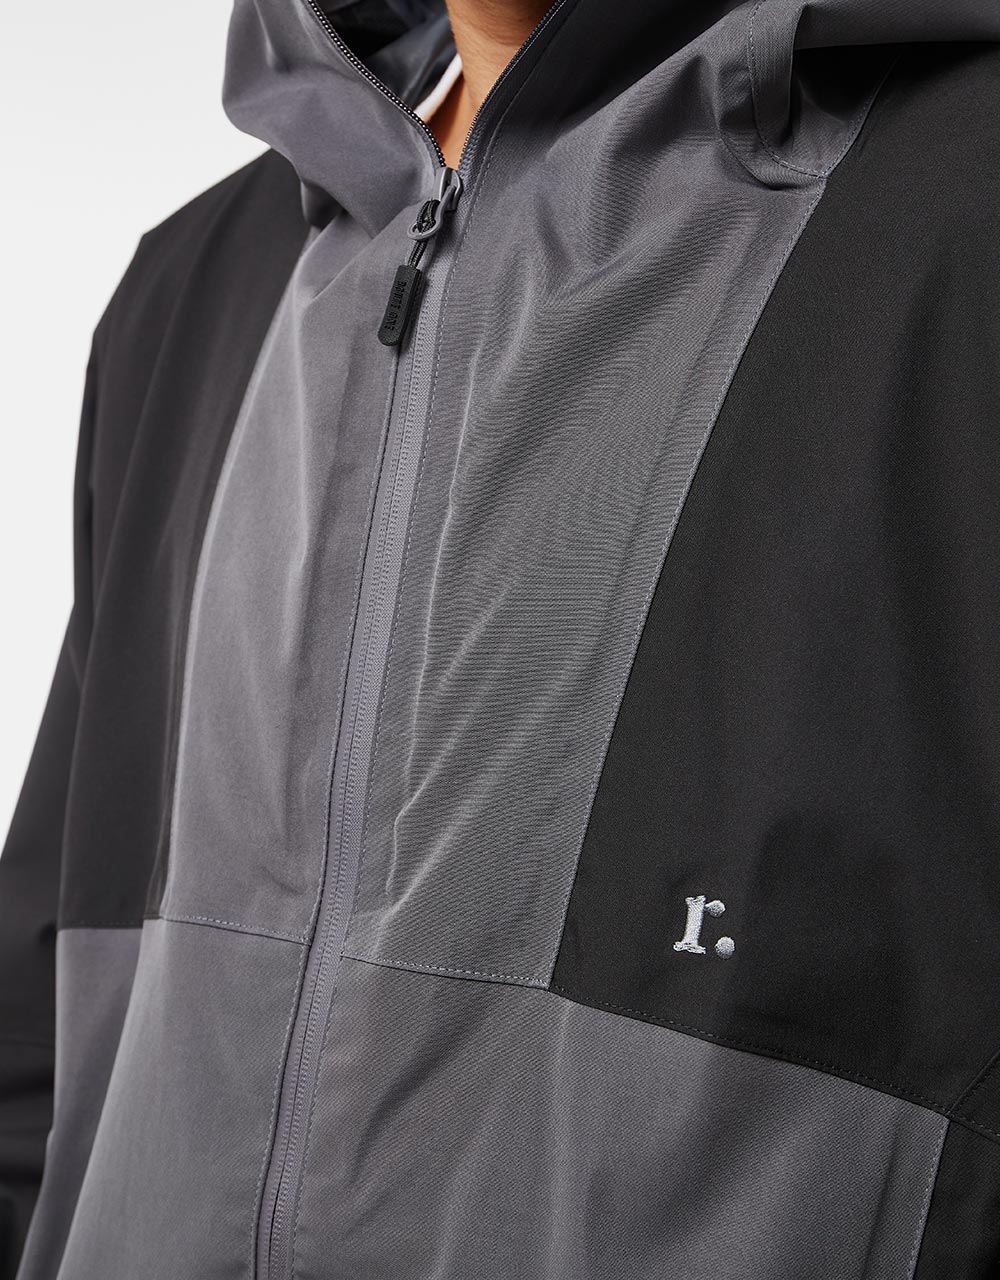 Route One Explorer Jacket - Charcoal